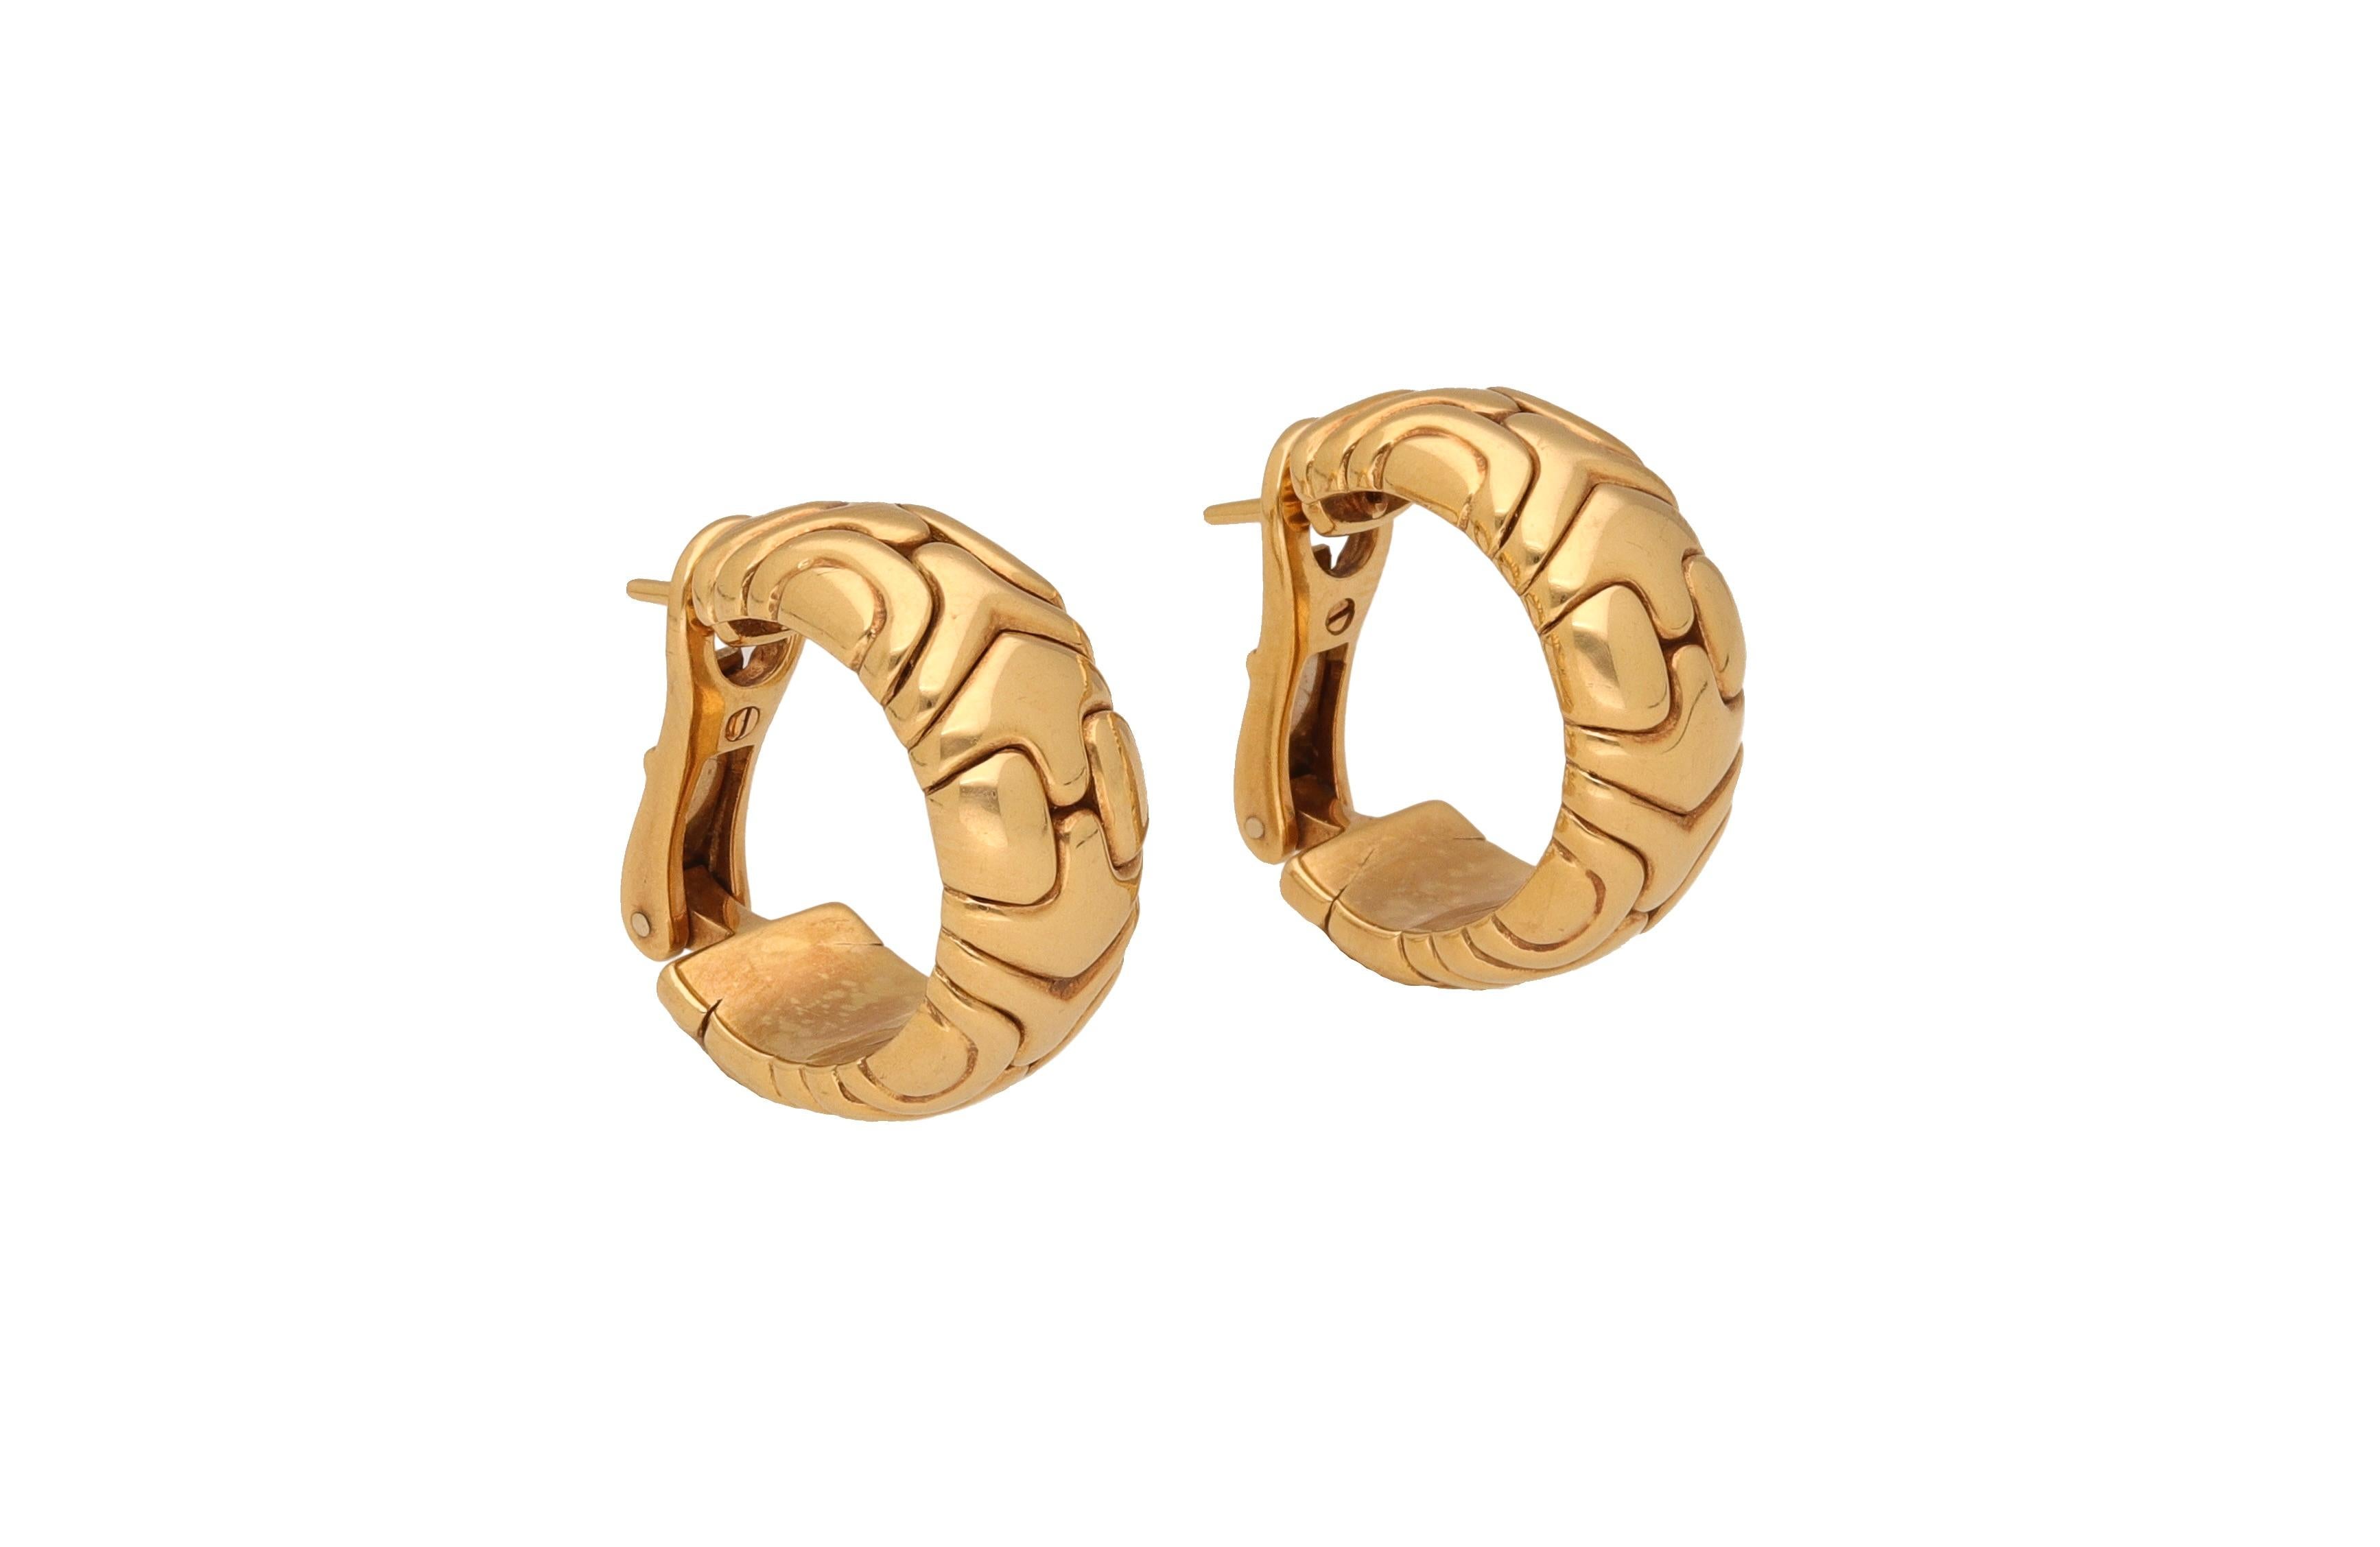 Pair of hoop earrings made of 18 kt. gold signed Bulgari.
This iconic design belongs to Bulgari's Hive collection.
Perfect for wearing on any occasion, these earrings are made with a stud and clip.

1990 ca.
Weight: 32.10
Outer diameter: 2.35